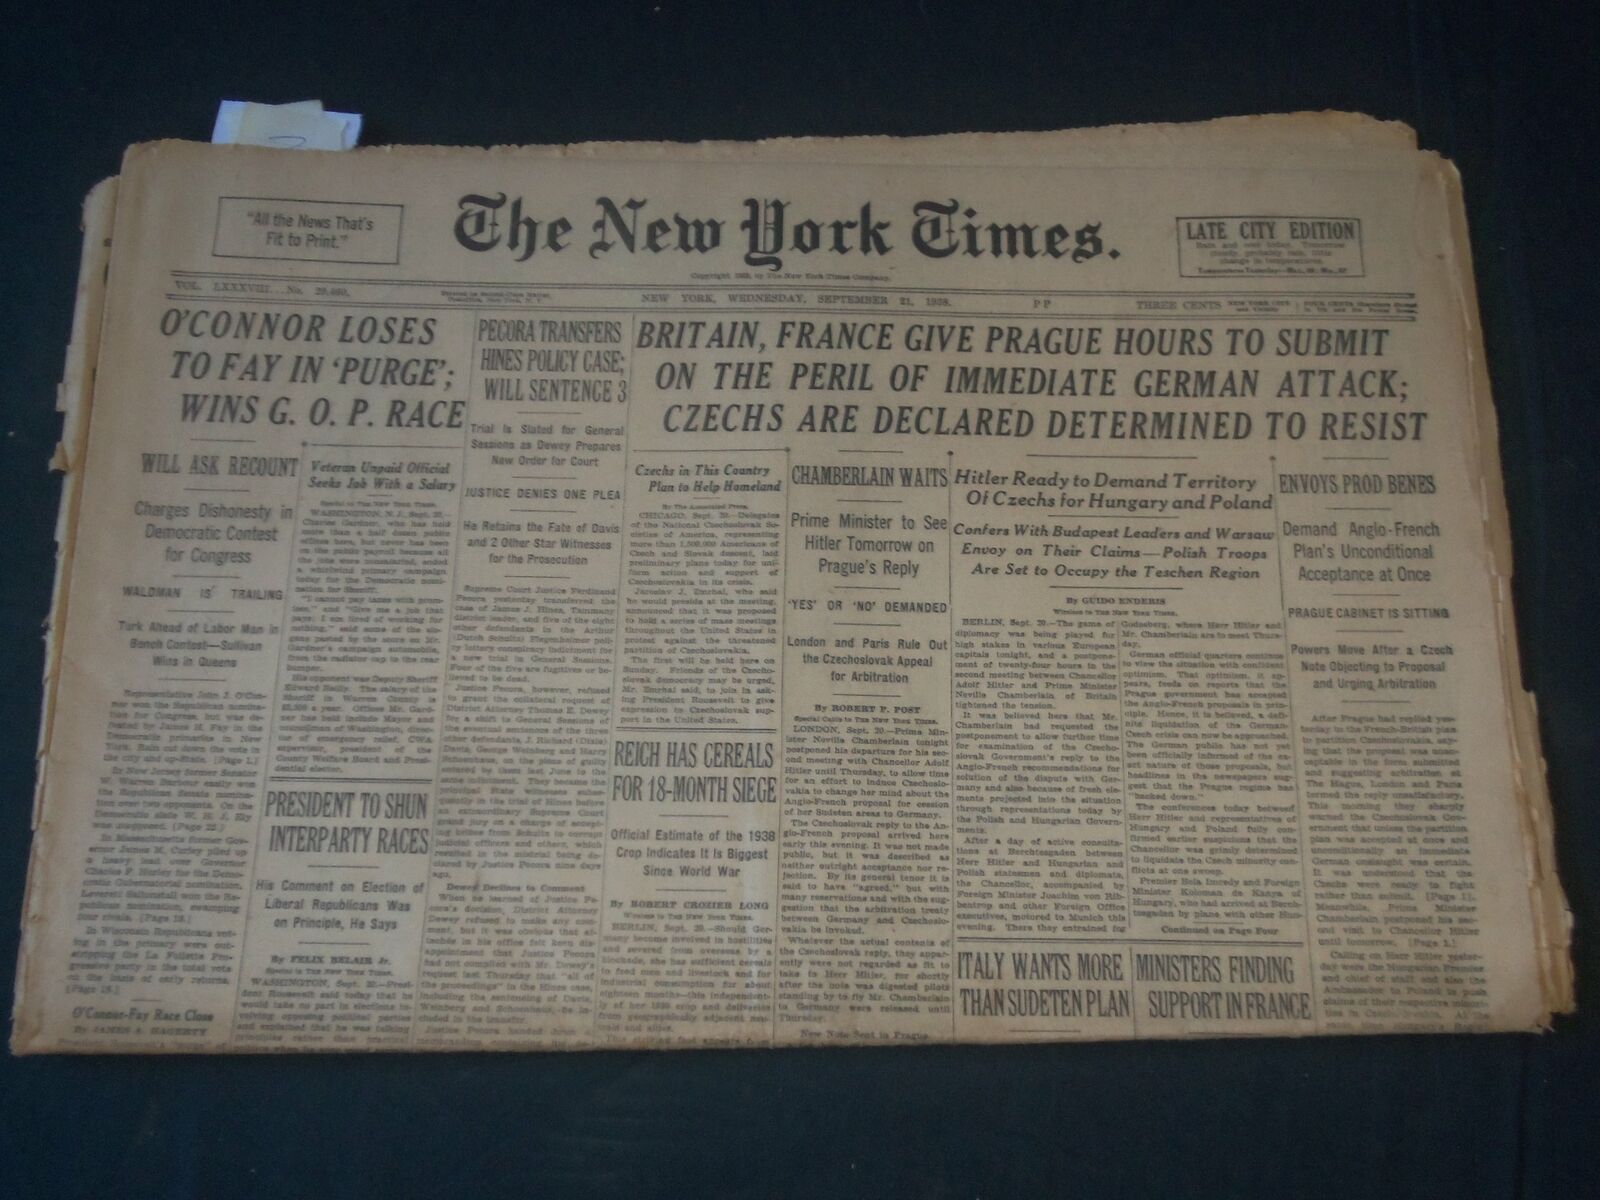 1938 SEPT 21 NEW YORK TIMES -BRITAIN FRANCE GIVE PRAGUE HOURS TO SUBMIT- NP 3605